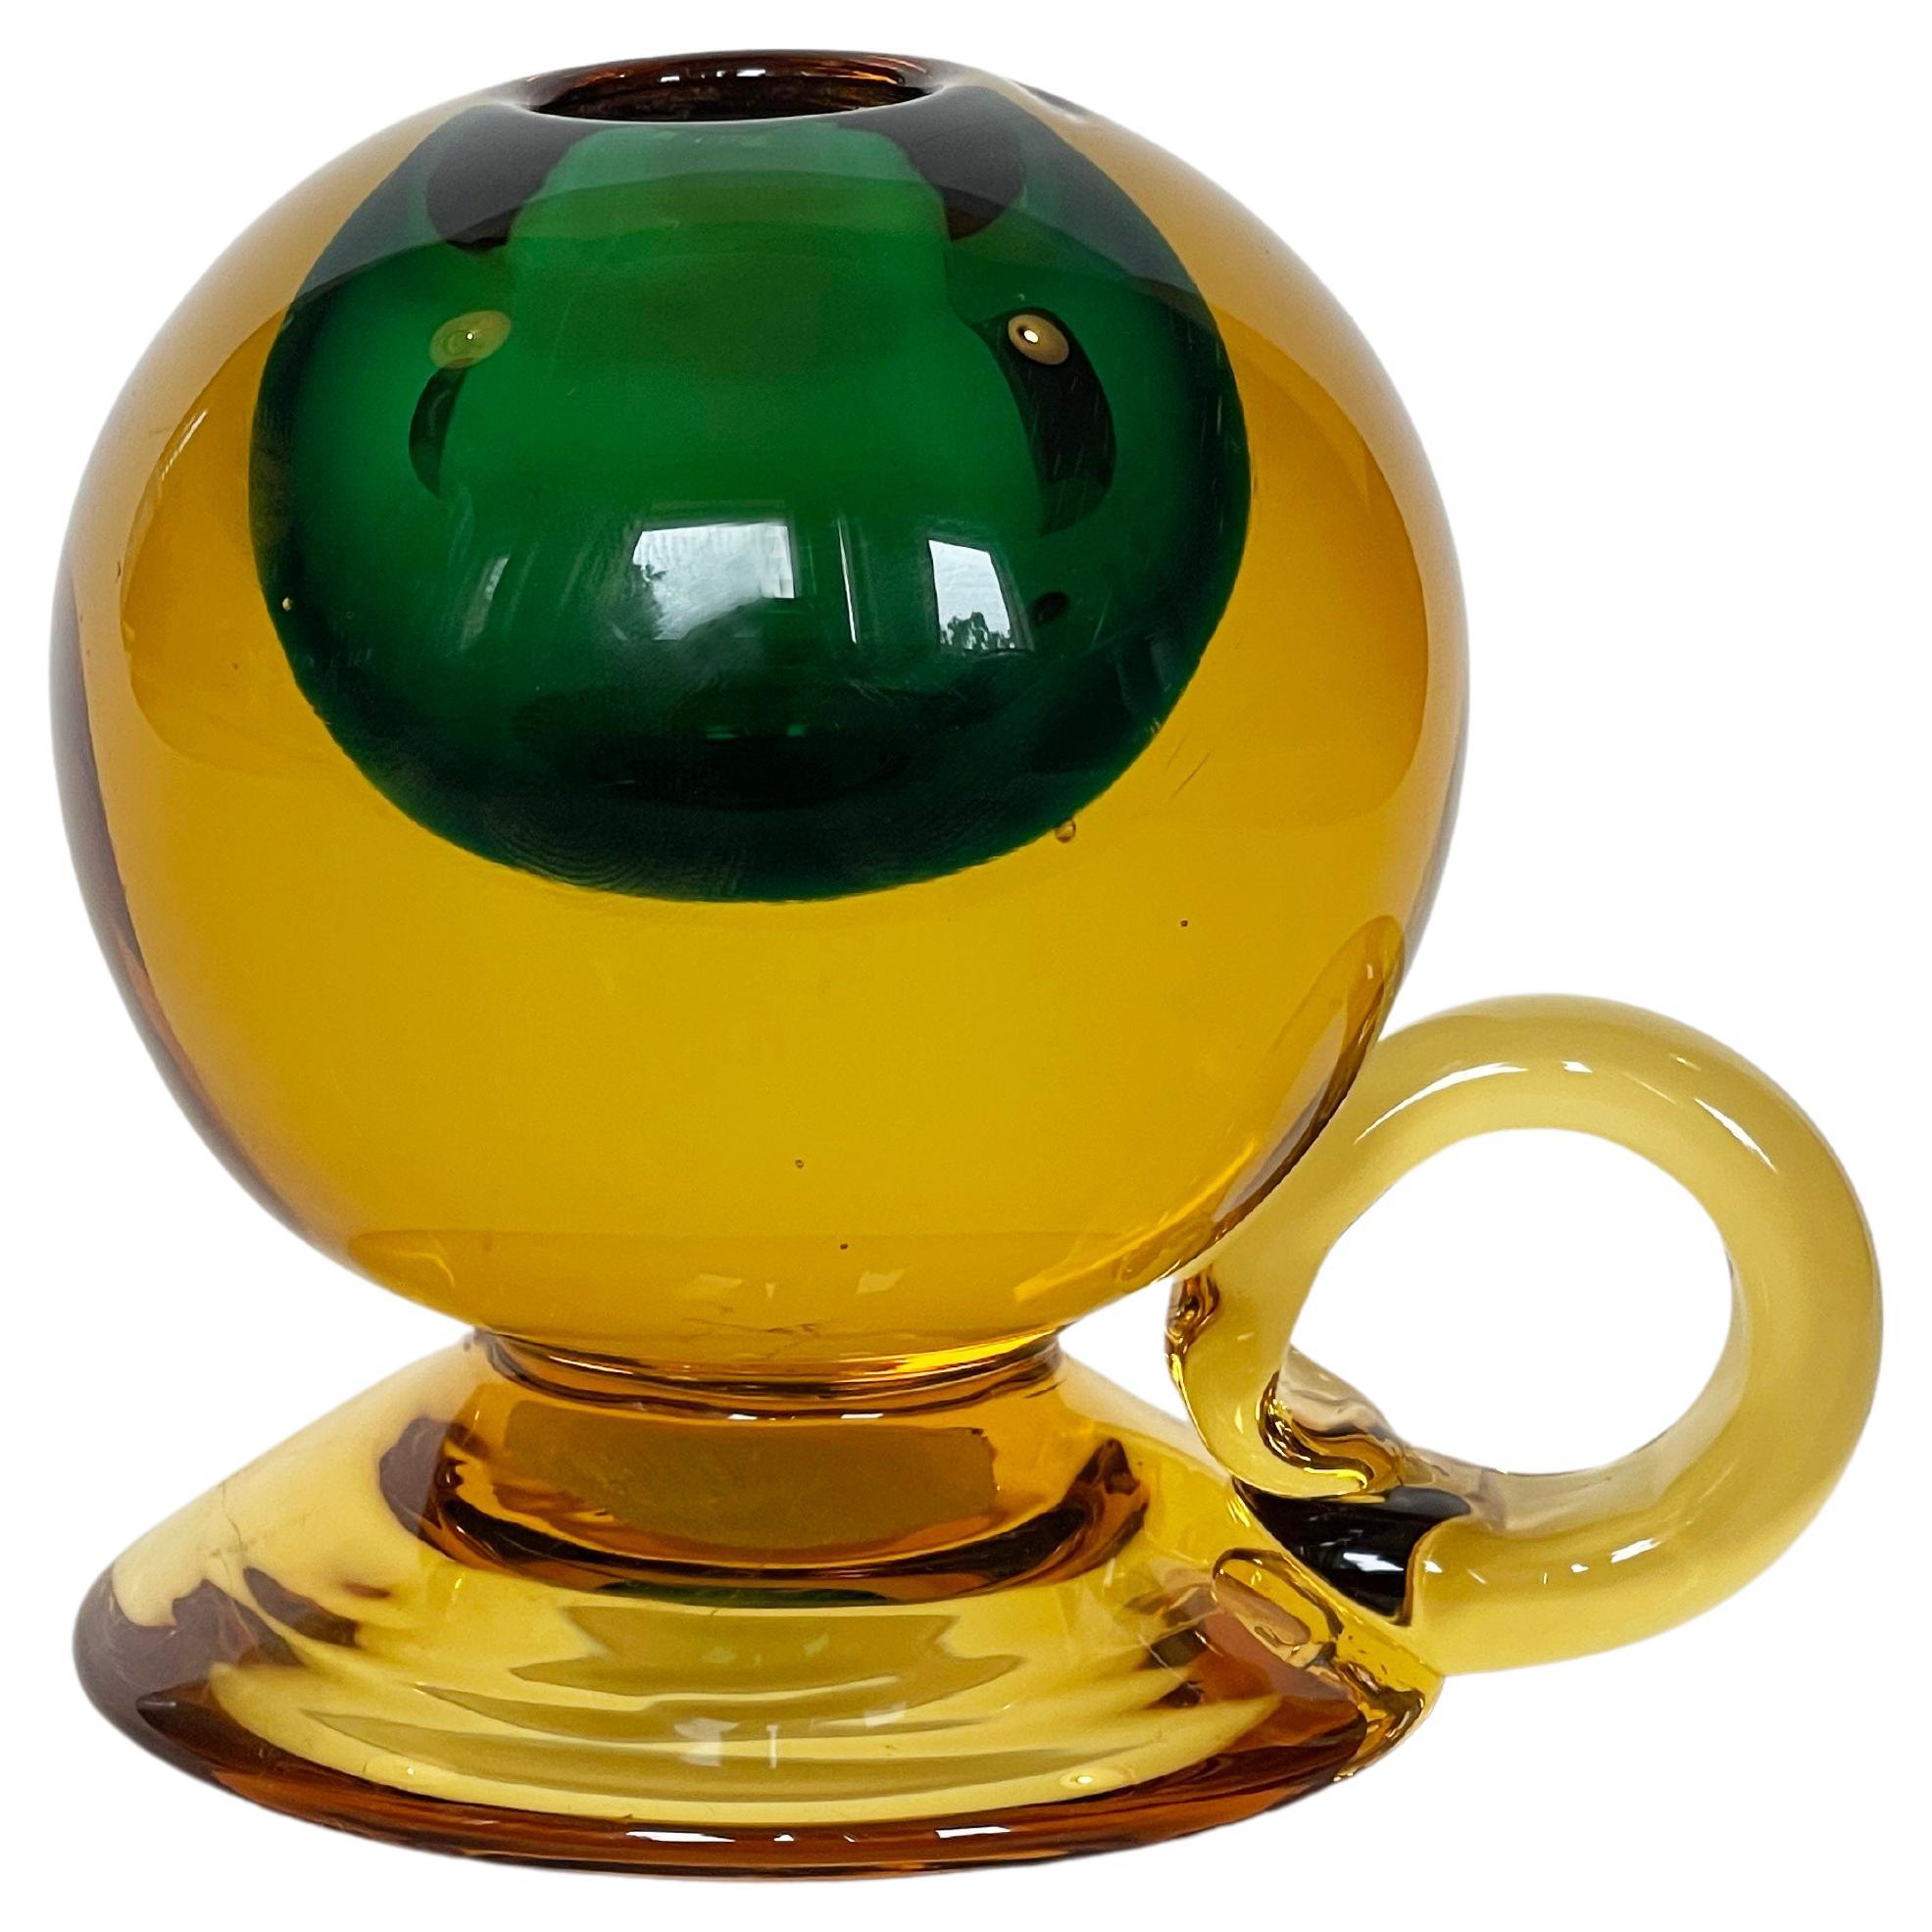 Gorgeous small candlestick by Vetreria Cenedese.
Sommerso hand made glass sphere from heavy chunky Murano art glas.
A many famous artists worked for this maker, this particular piece comes in an amber or golden glow with a dark green inner.
Most